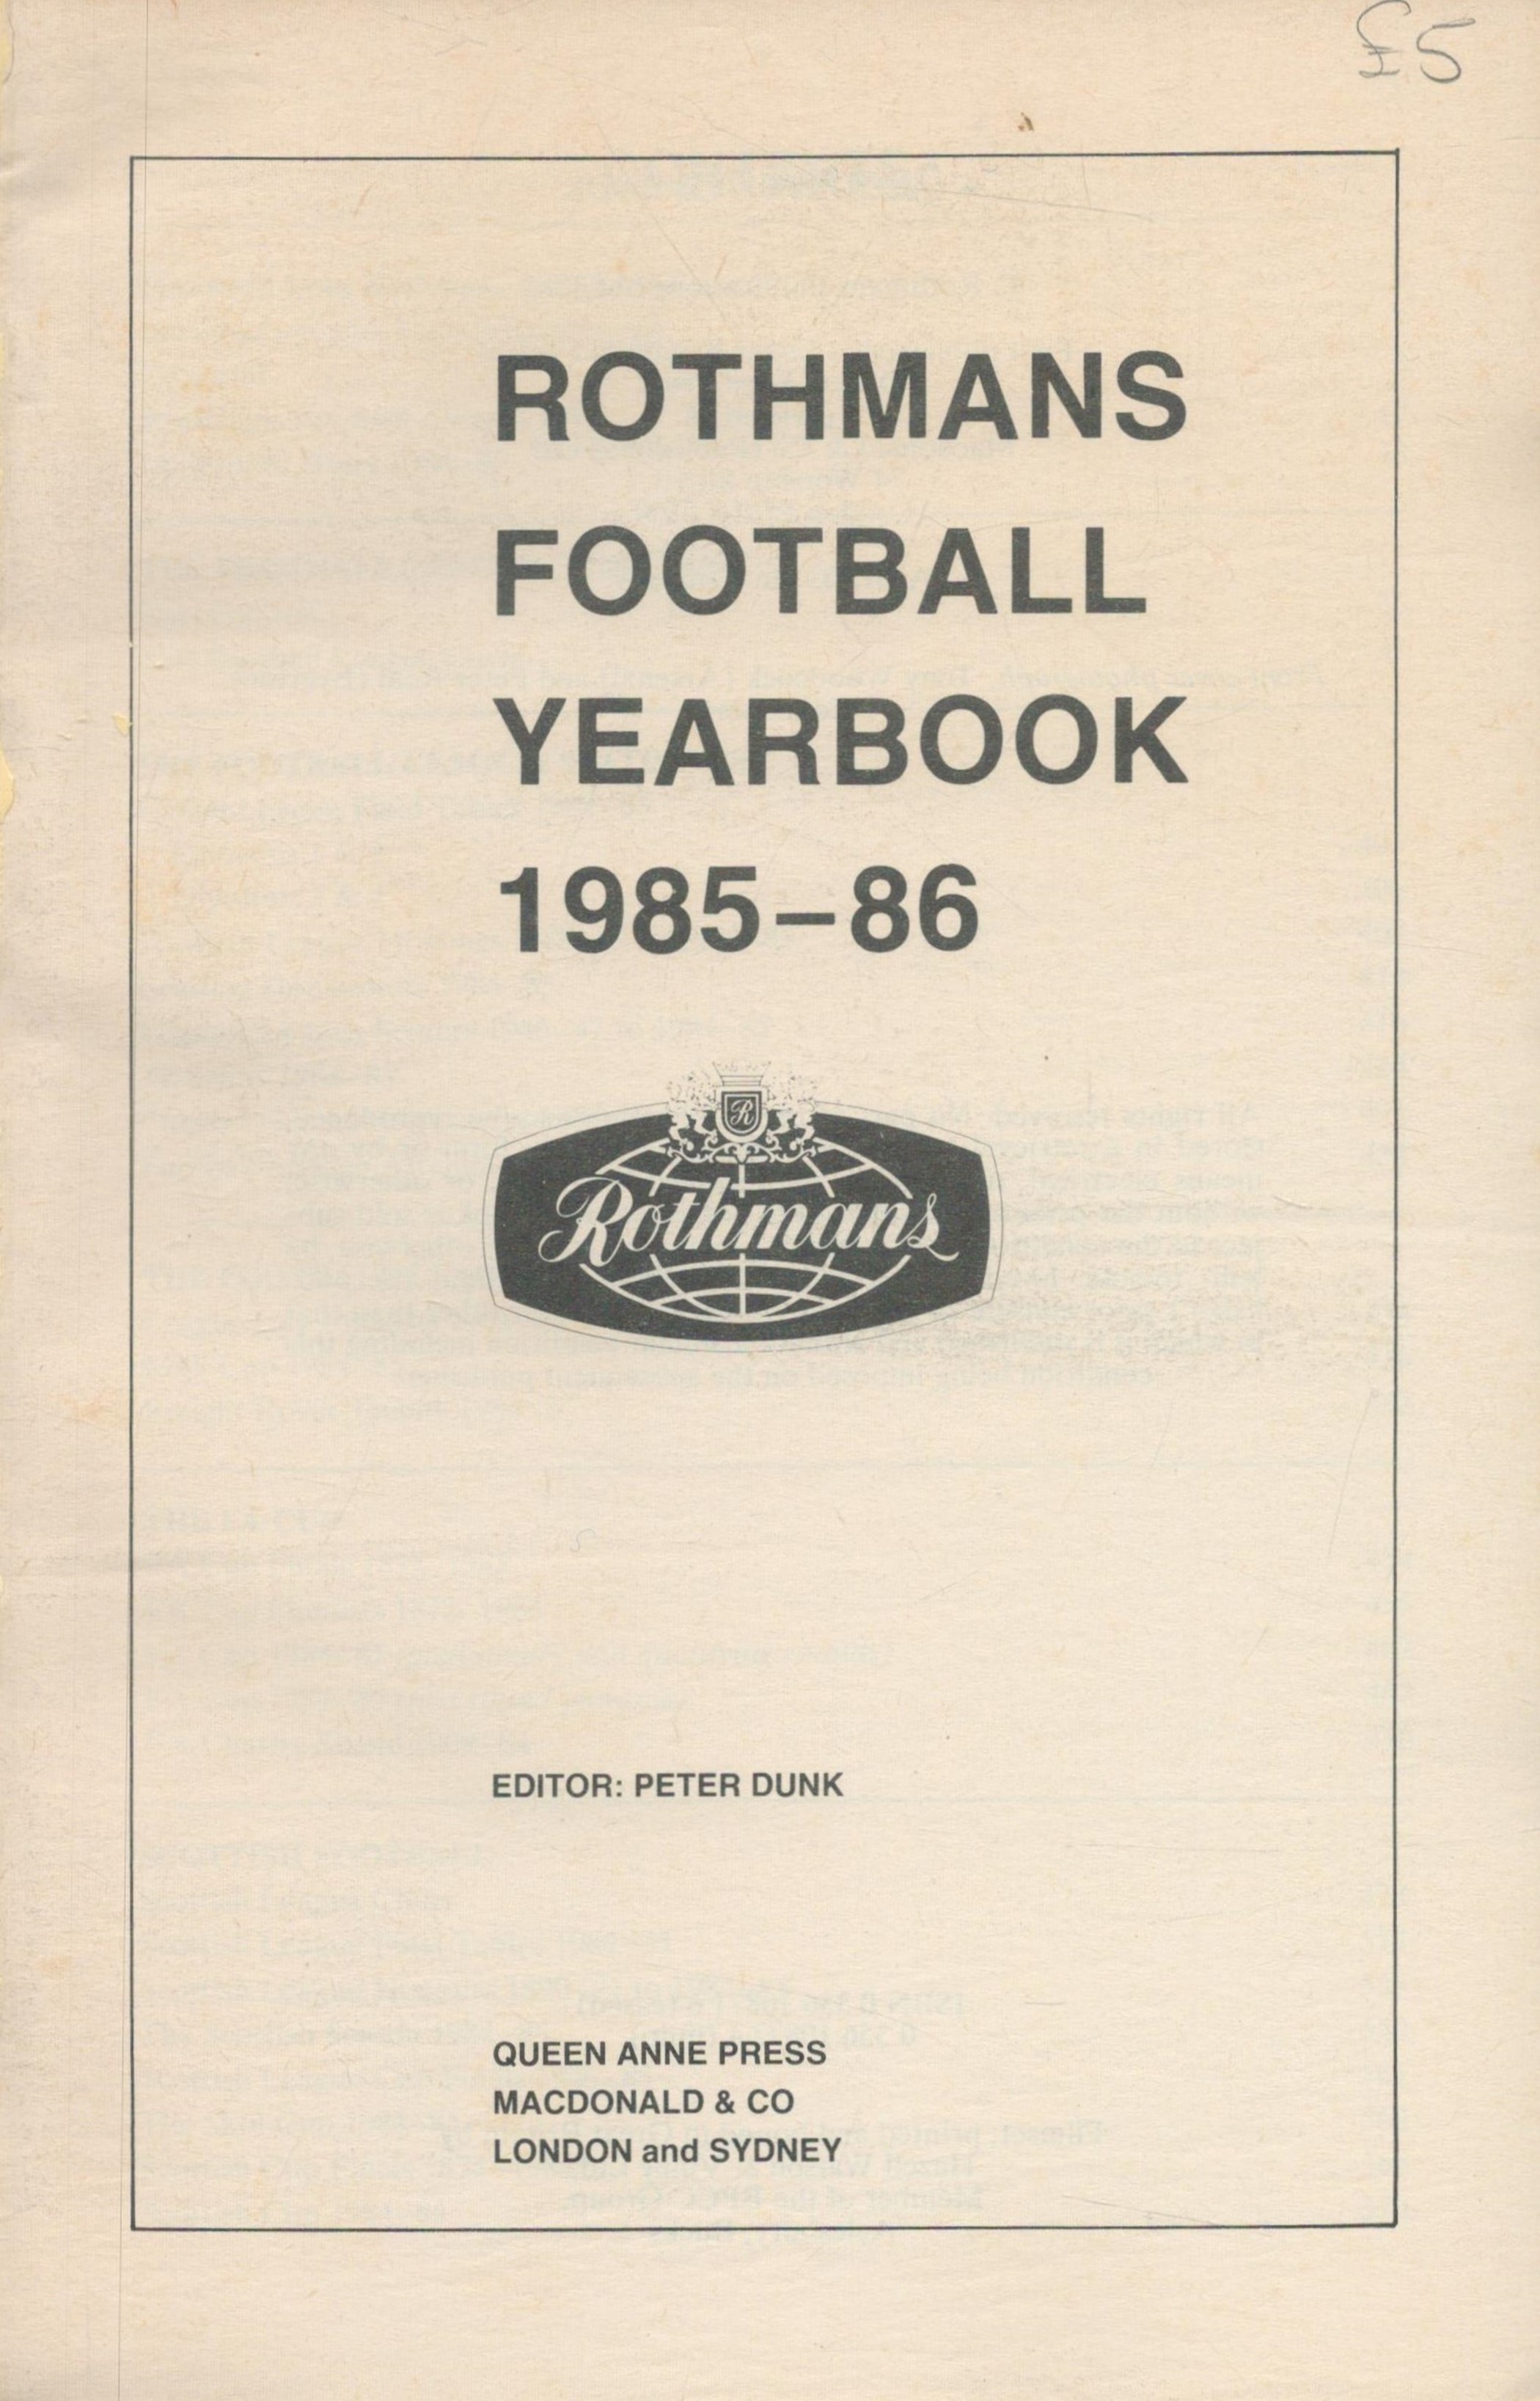 Rothmans football yearbook 1985-86 softback book. Section of book not attached to cover. UNSIGNED. - Image 2 of 3